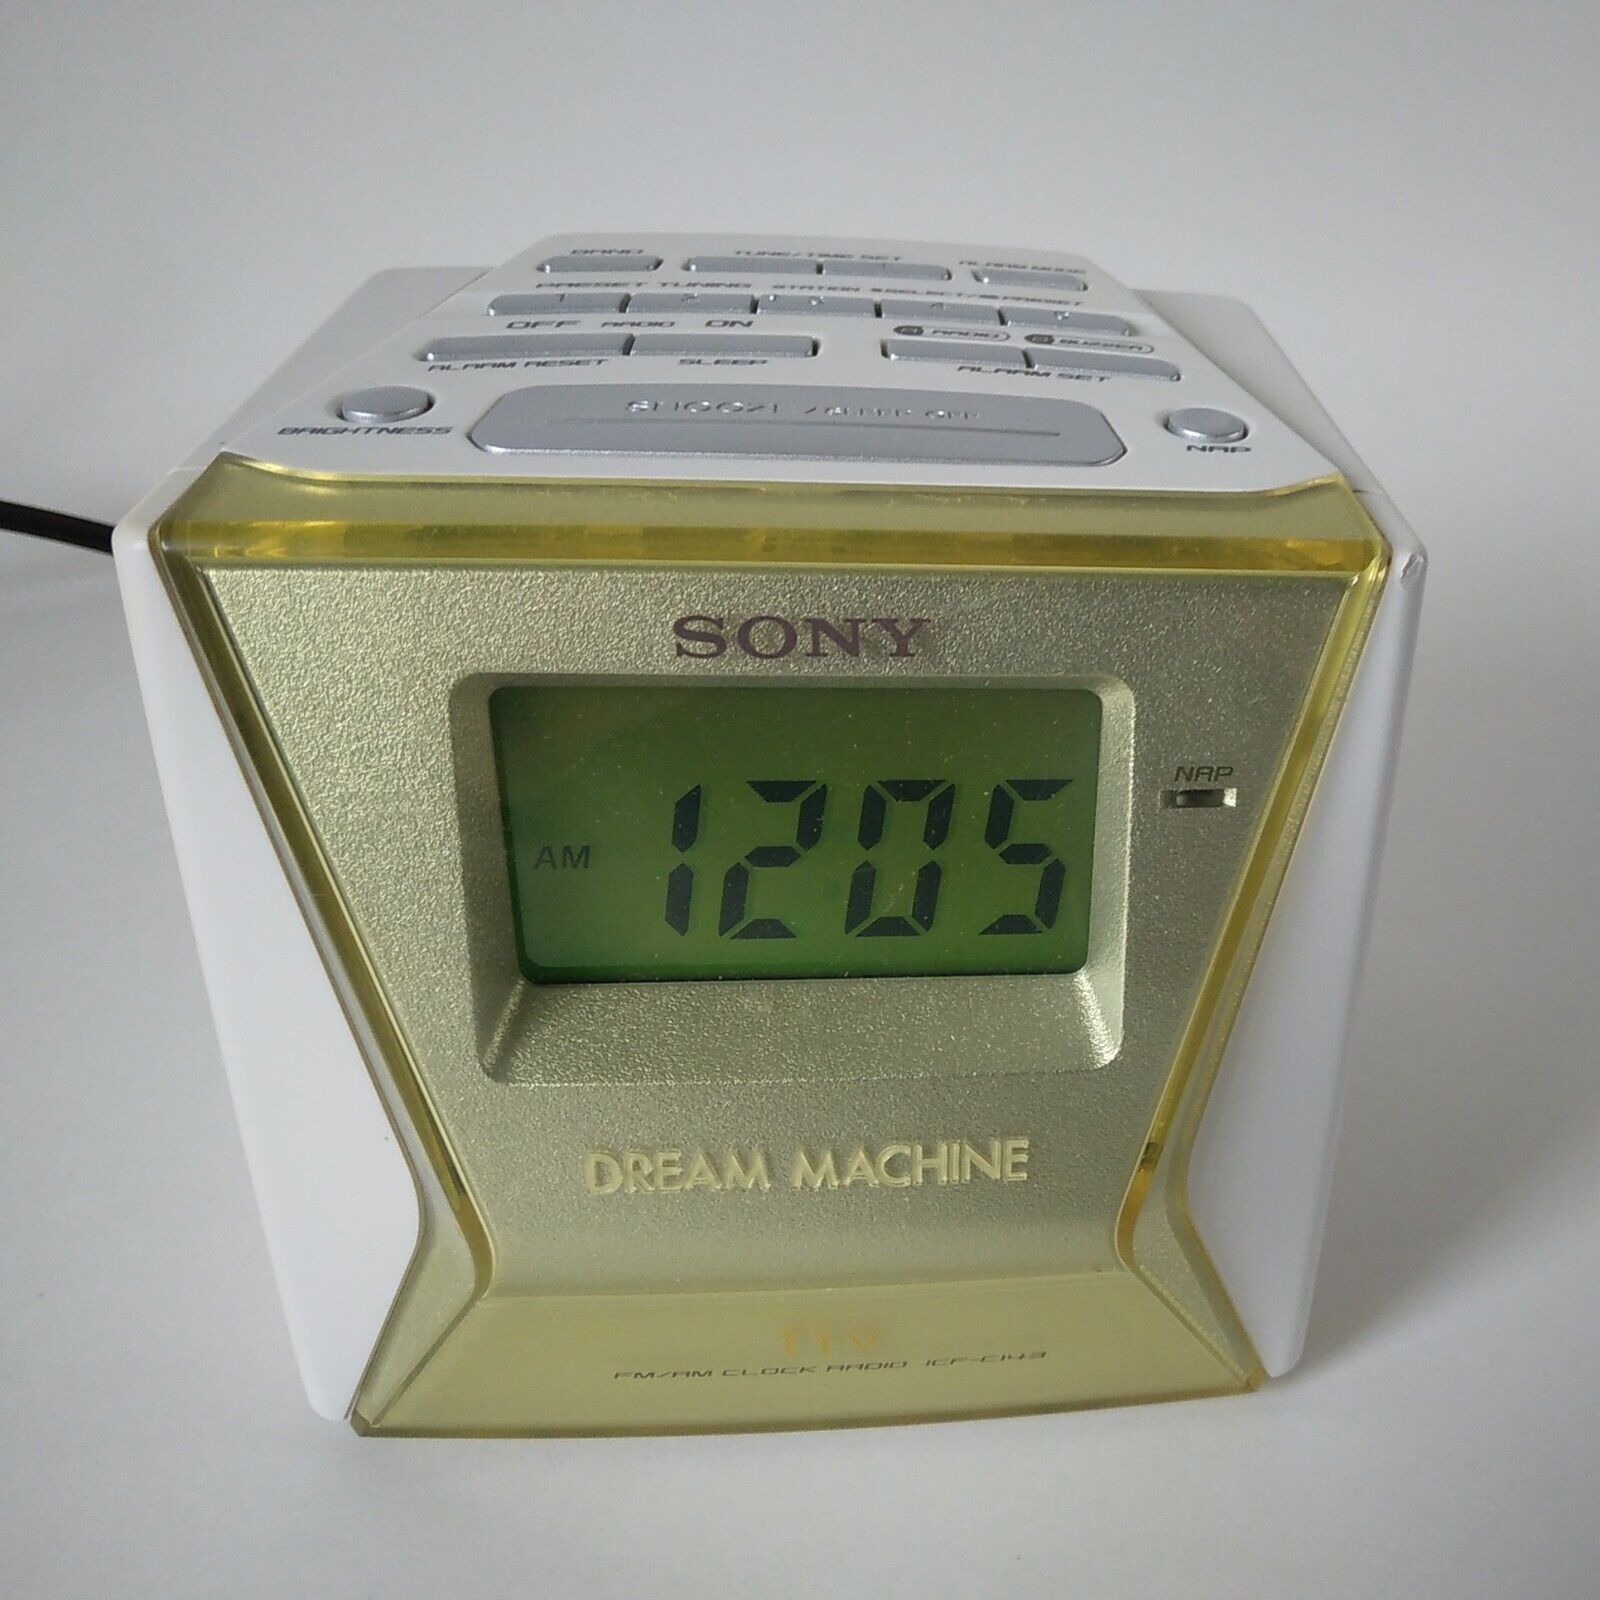 Sony ICF C143 Cube Radio Alarm Clock-AM/FM-Back lit LED-Dimmable-Tested Works